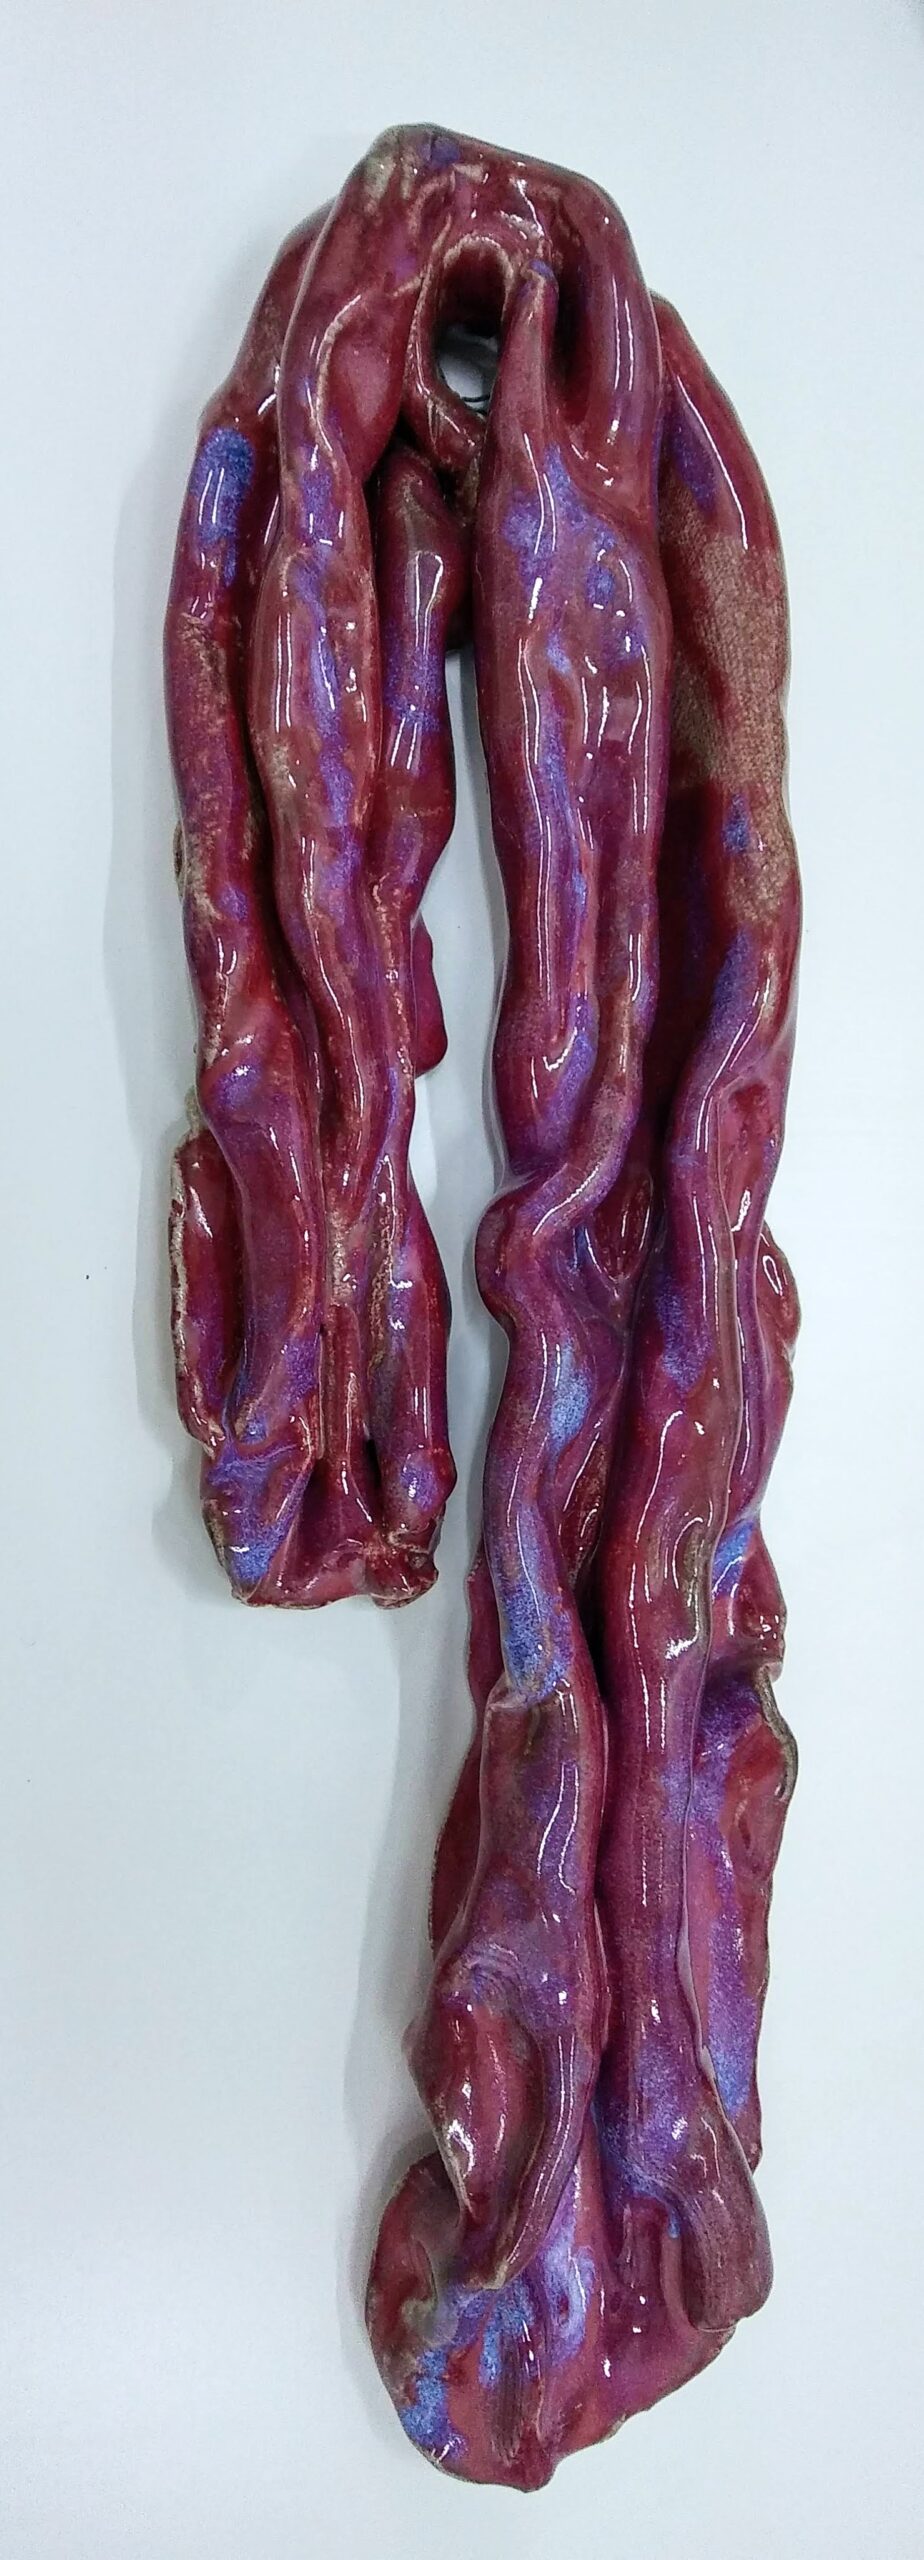 Ceramic art sculpture in the shape of a red scarf